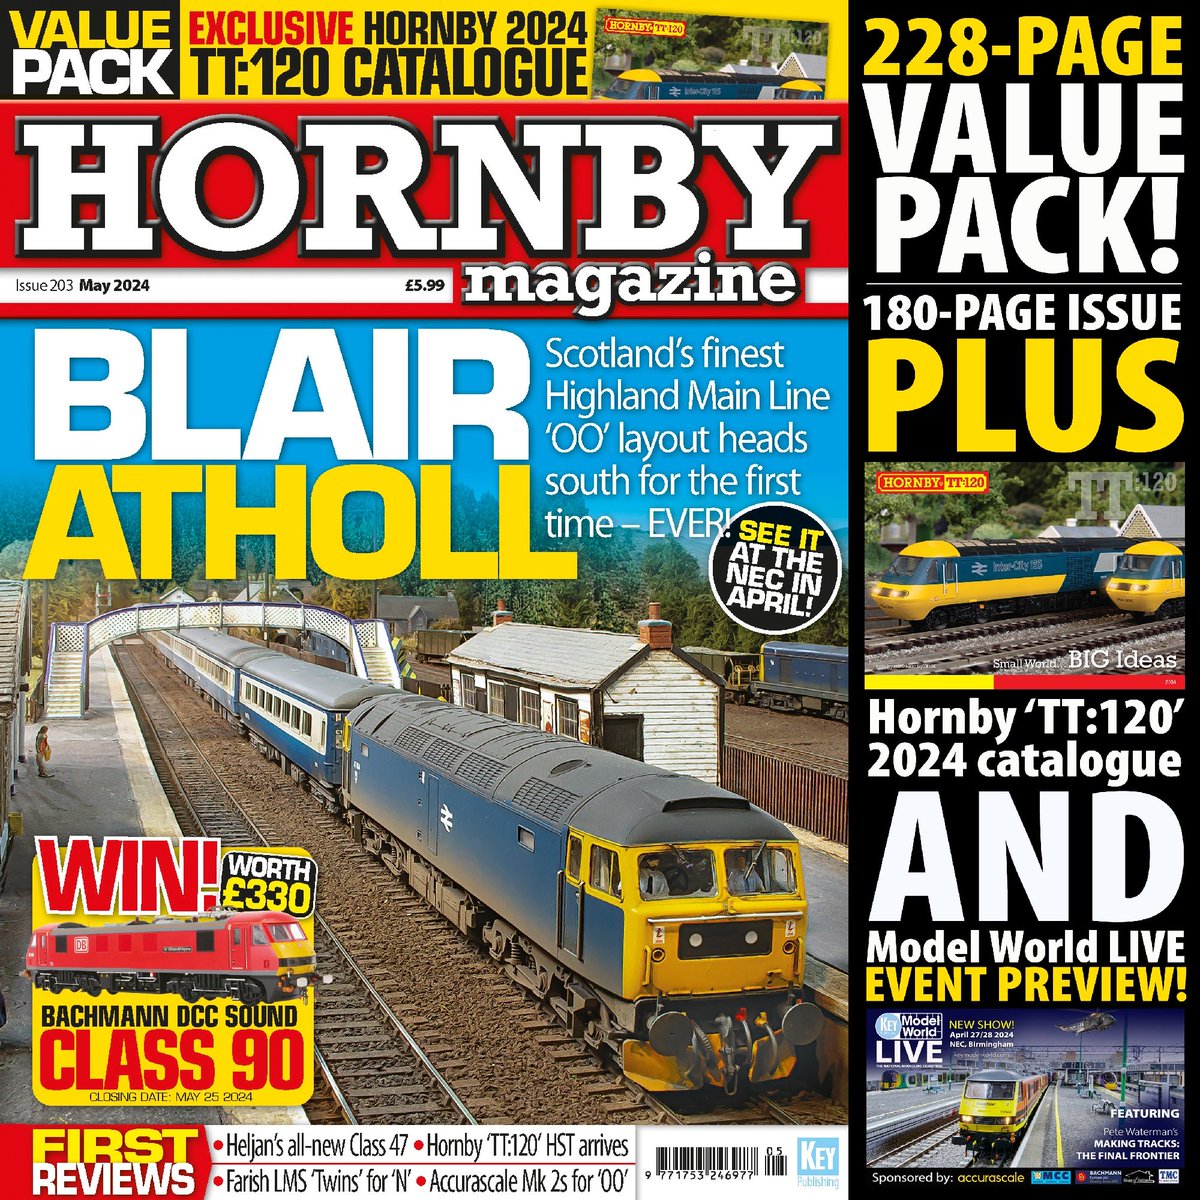 NEW ISSUE OUT NOW! The May 2024 issue of Hornby Magazine is on sale now and its a bumper 228-page pack! Each copy comes with a 40-page Hornby TT:120 2024 catalogue AND an eight-page preview to Model World LIVE on April 27/28: hubs.ly/Q02rFZgT0 #hornbymagazine #keymodelworld